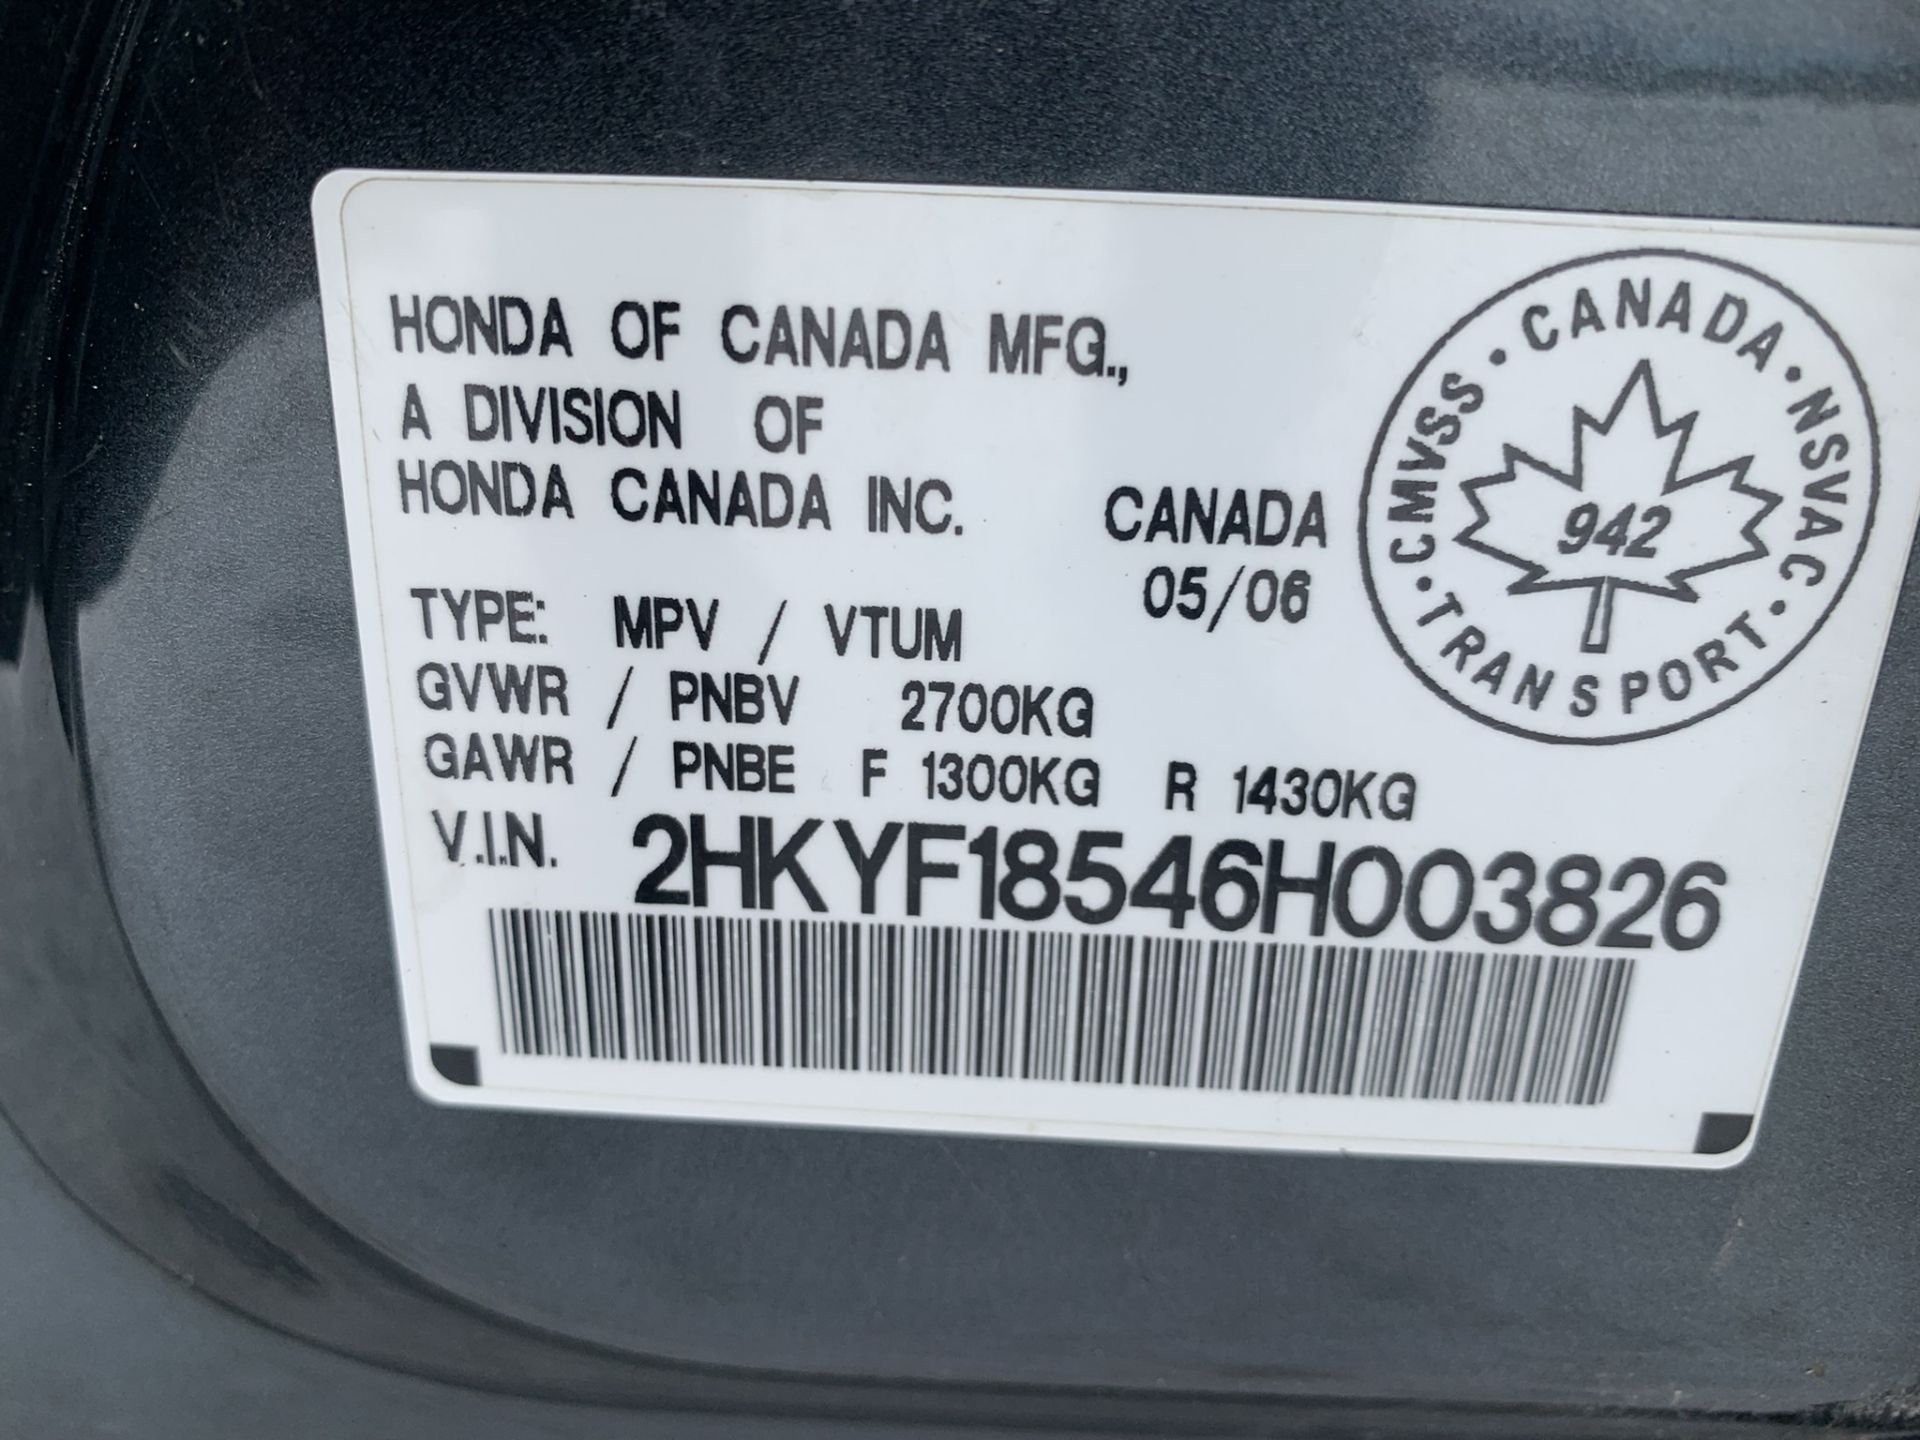 2006 HONDA PILOT SUV, AWD, V6, 4DR, LEATHER, APROX. 375,000 KMS SHOWING, S/N 2HKYF18546H003826 - Image 9 of 10